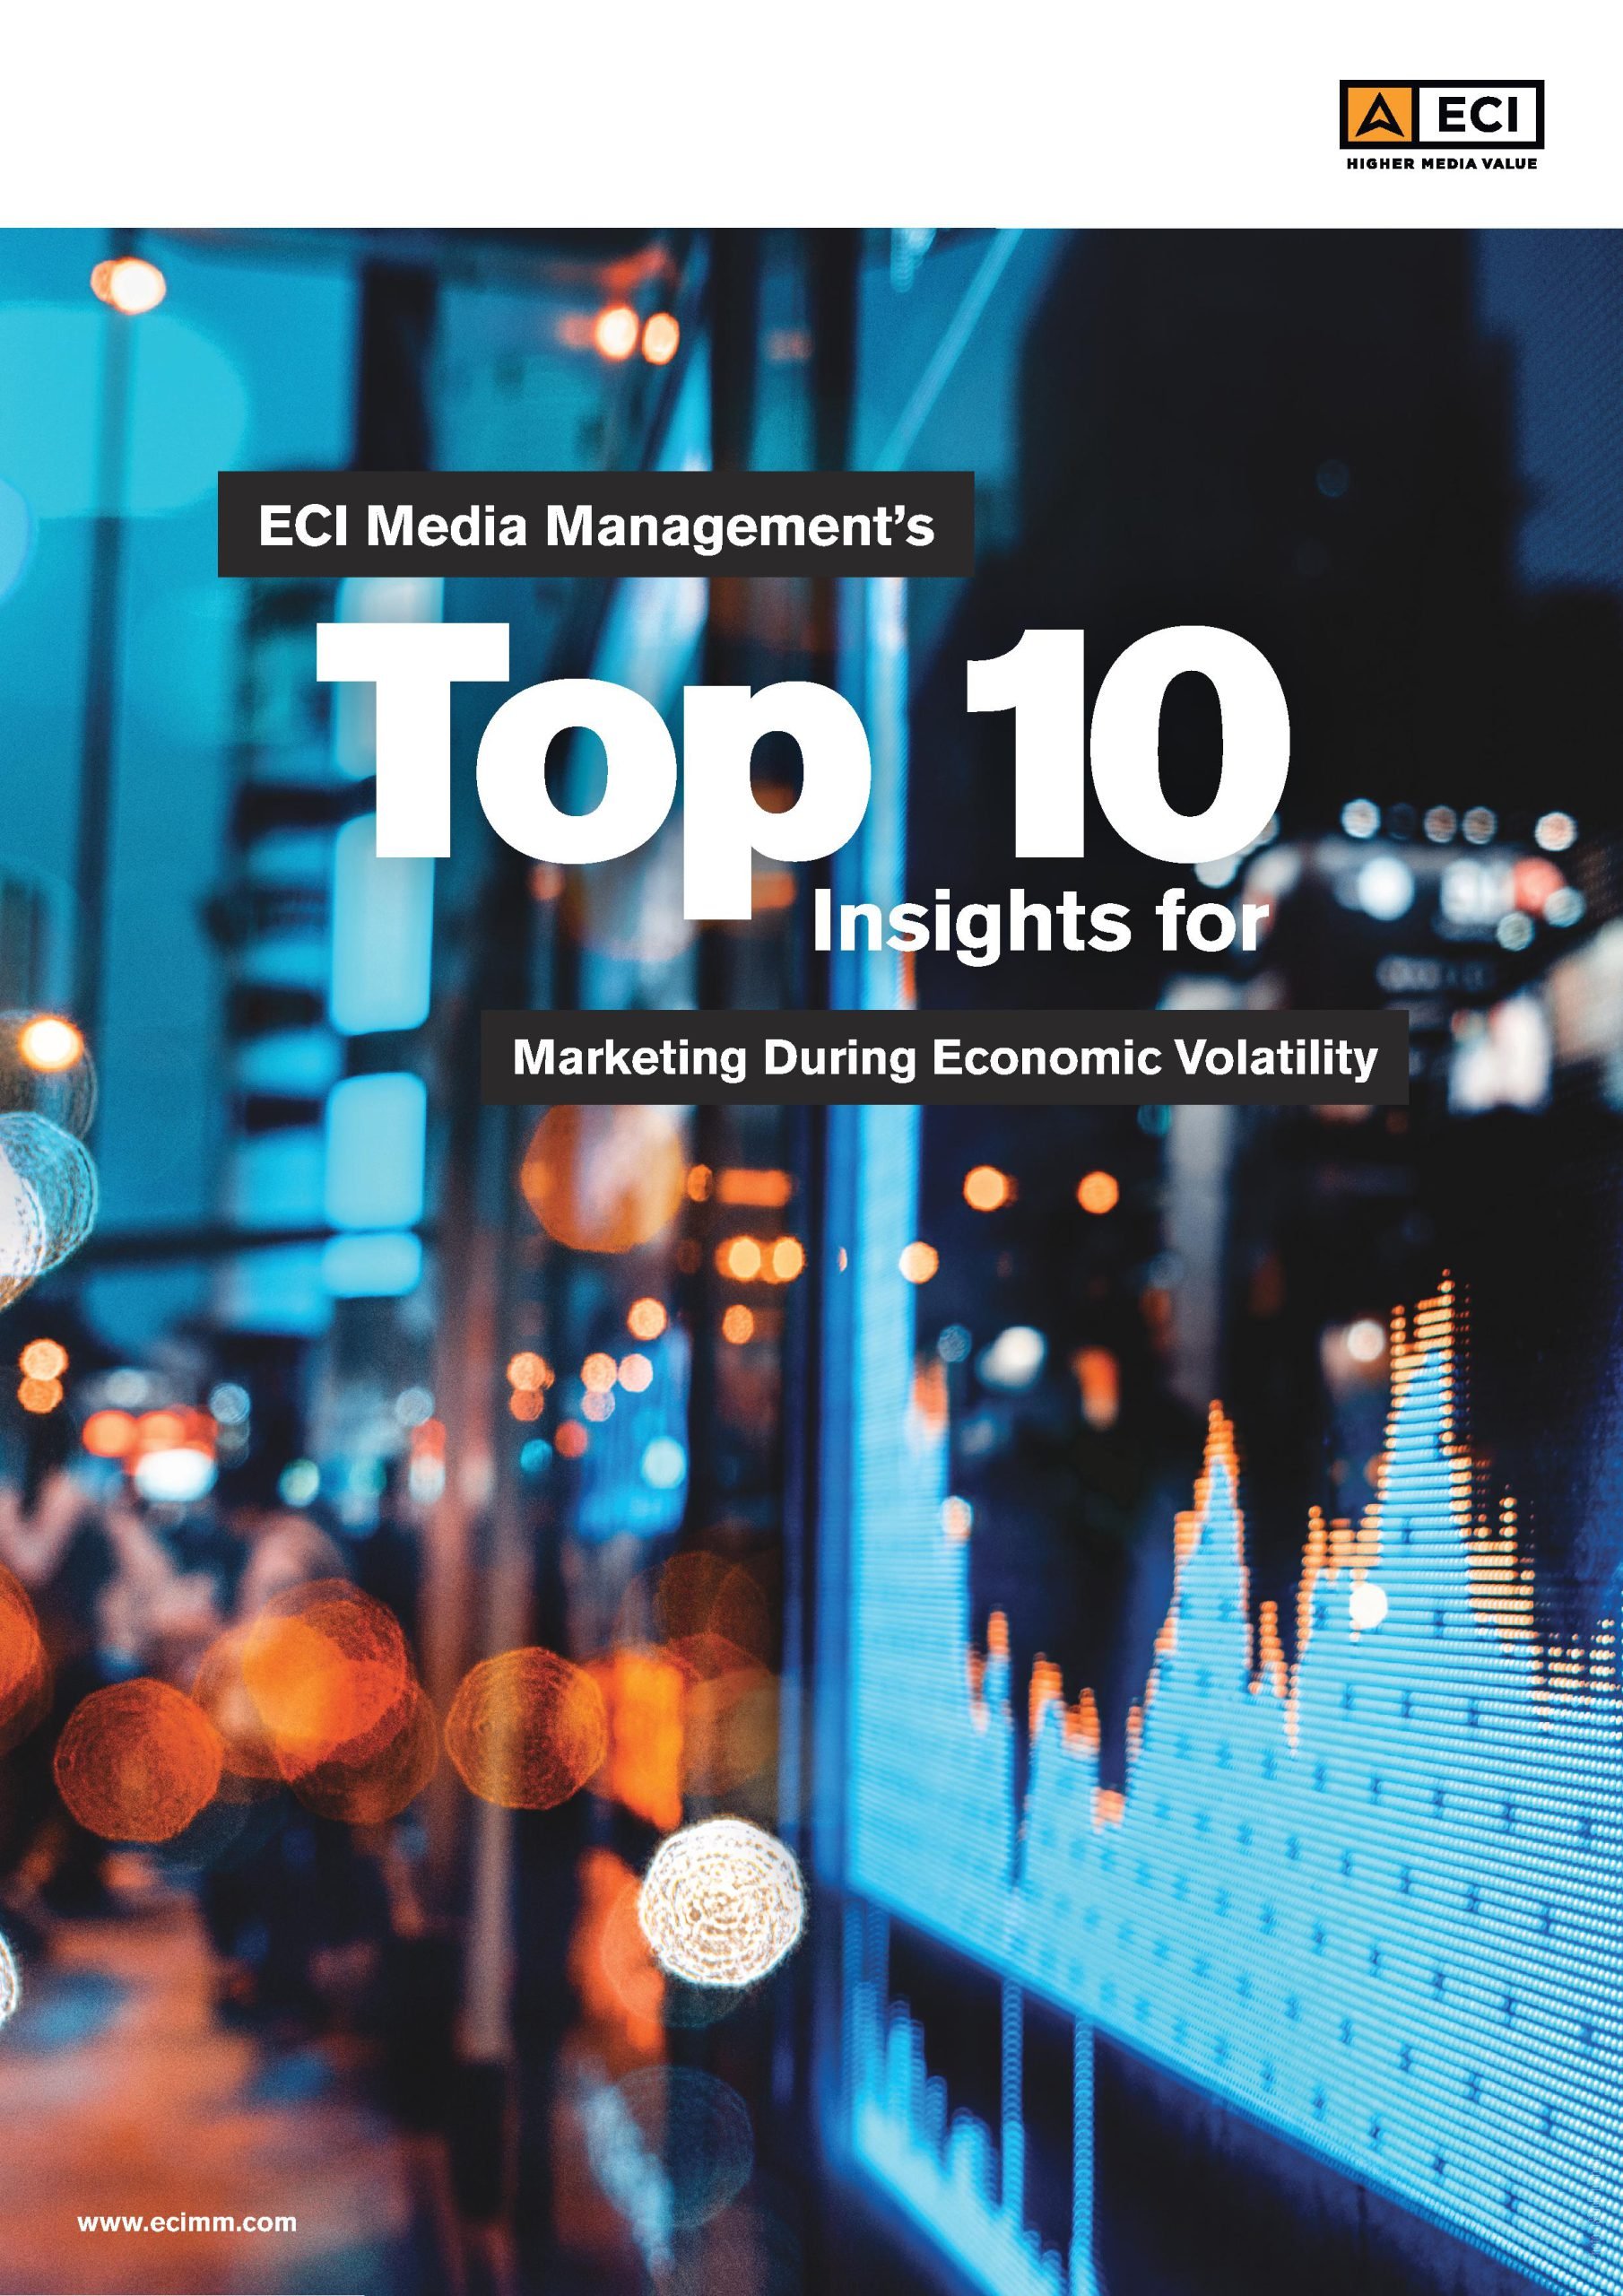 Top 10 Insights for Marketing During Economic Volatility